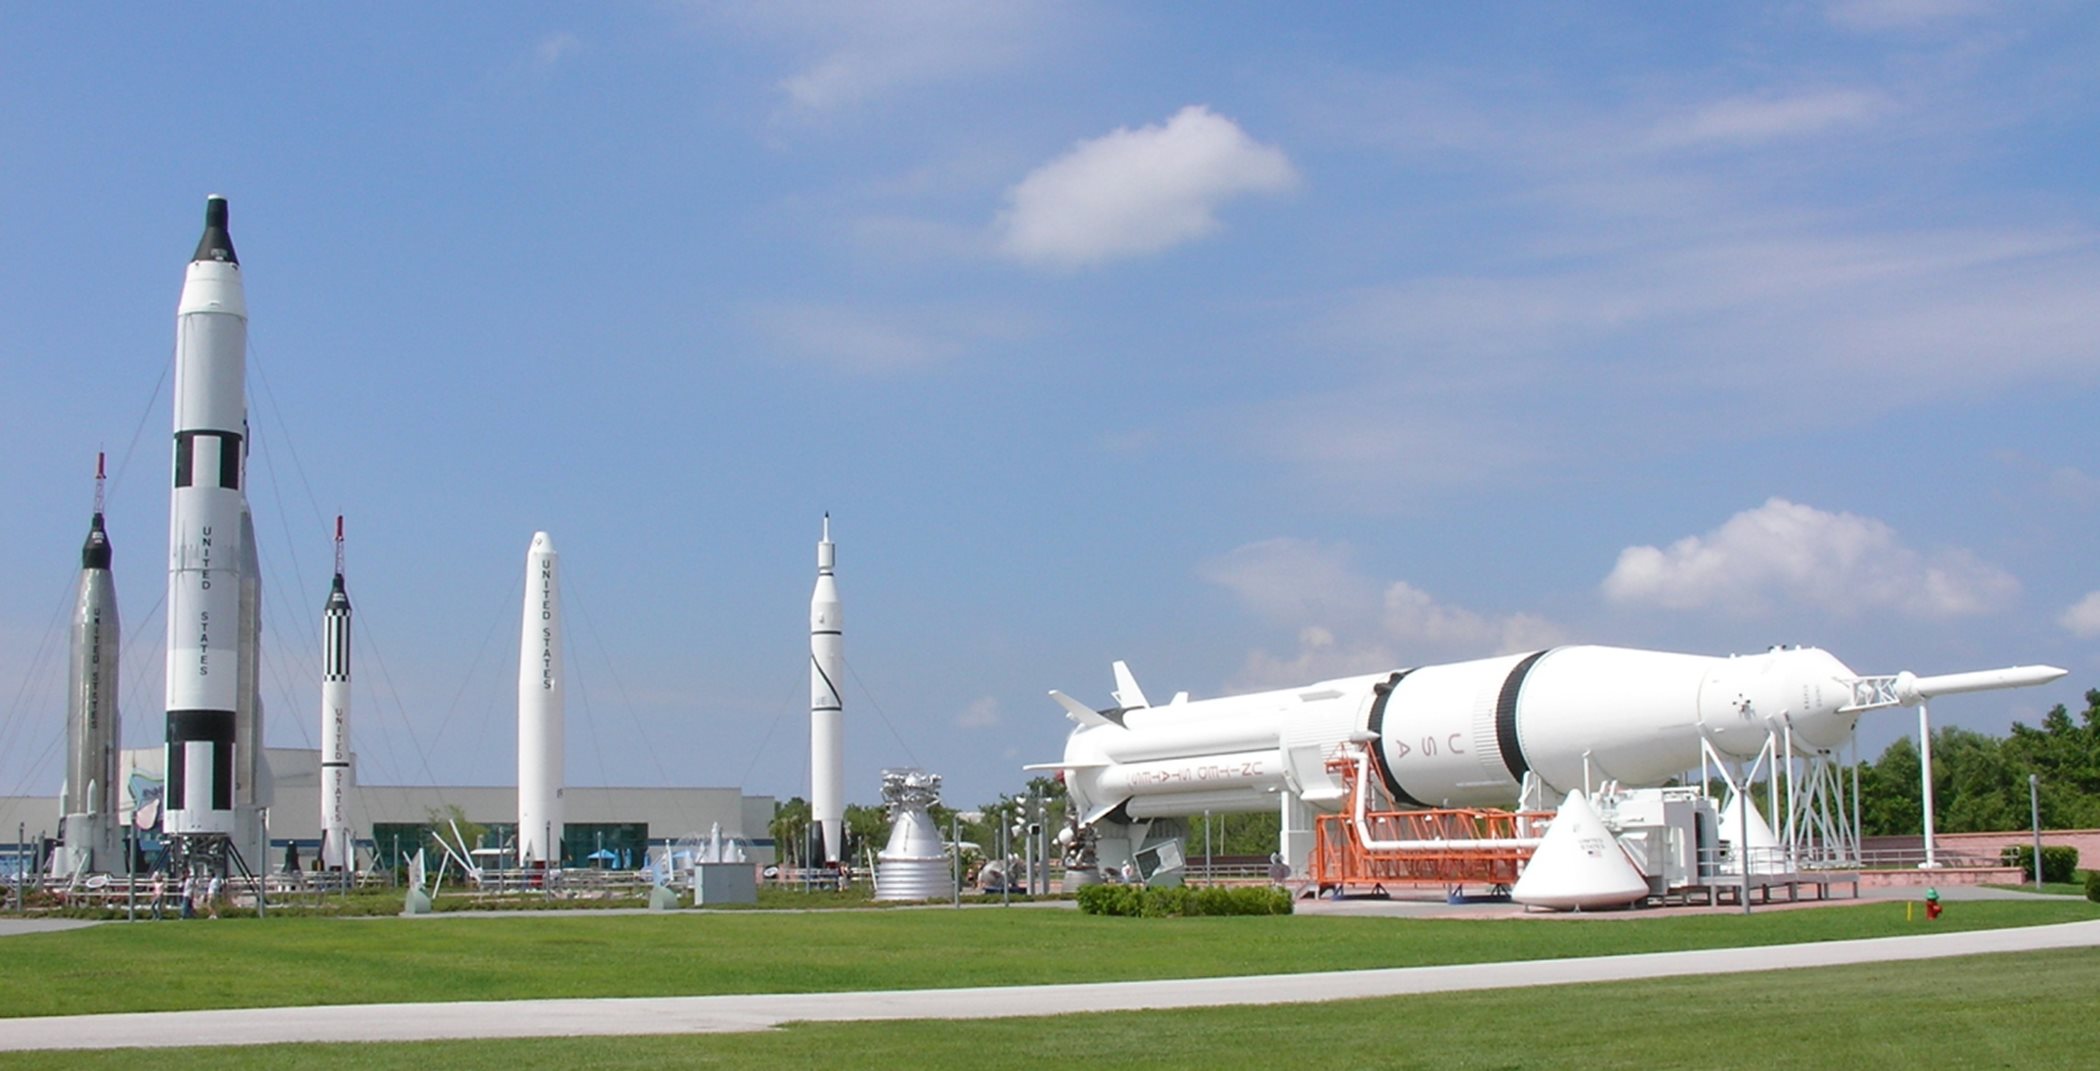 The Kennedy Space Center and Cape Canaveral Space Force Station